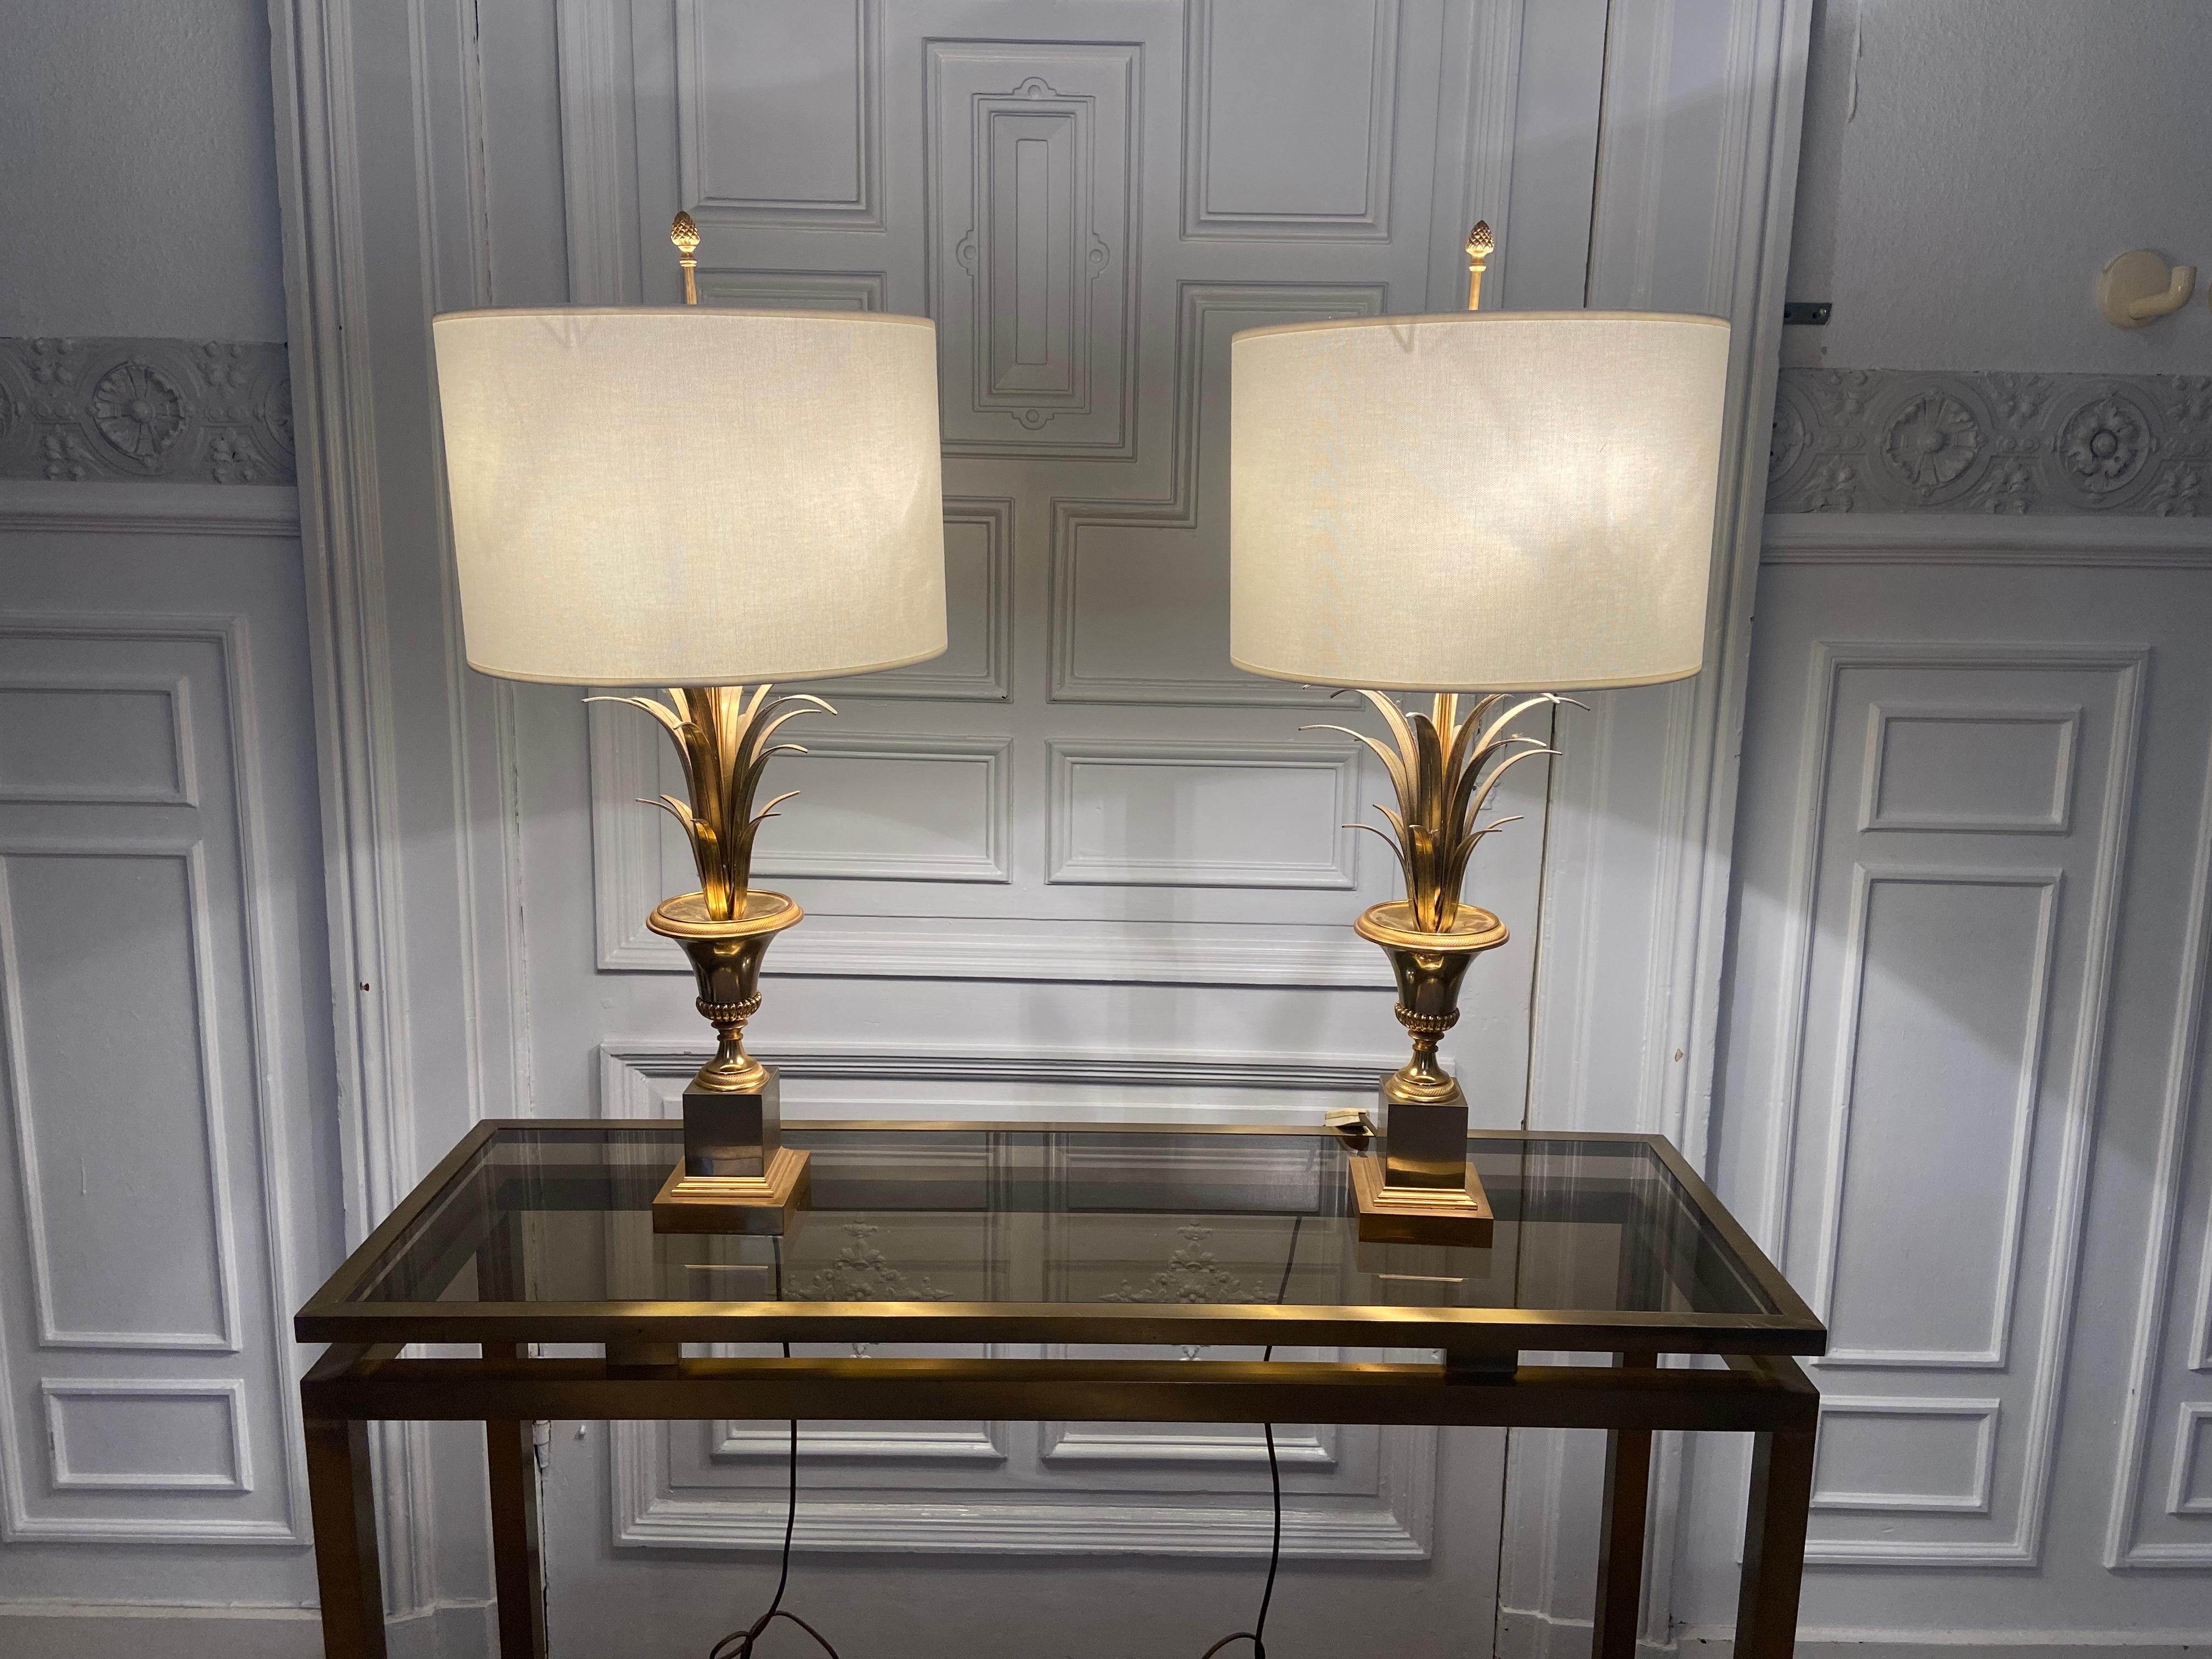 Pair of Belgian Epis Lamps by Boulanger, 1970s.